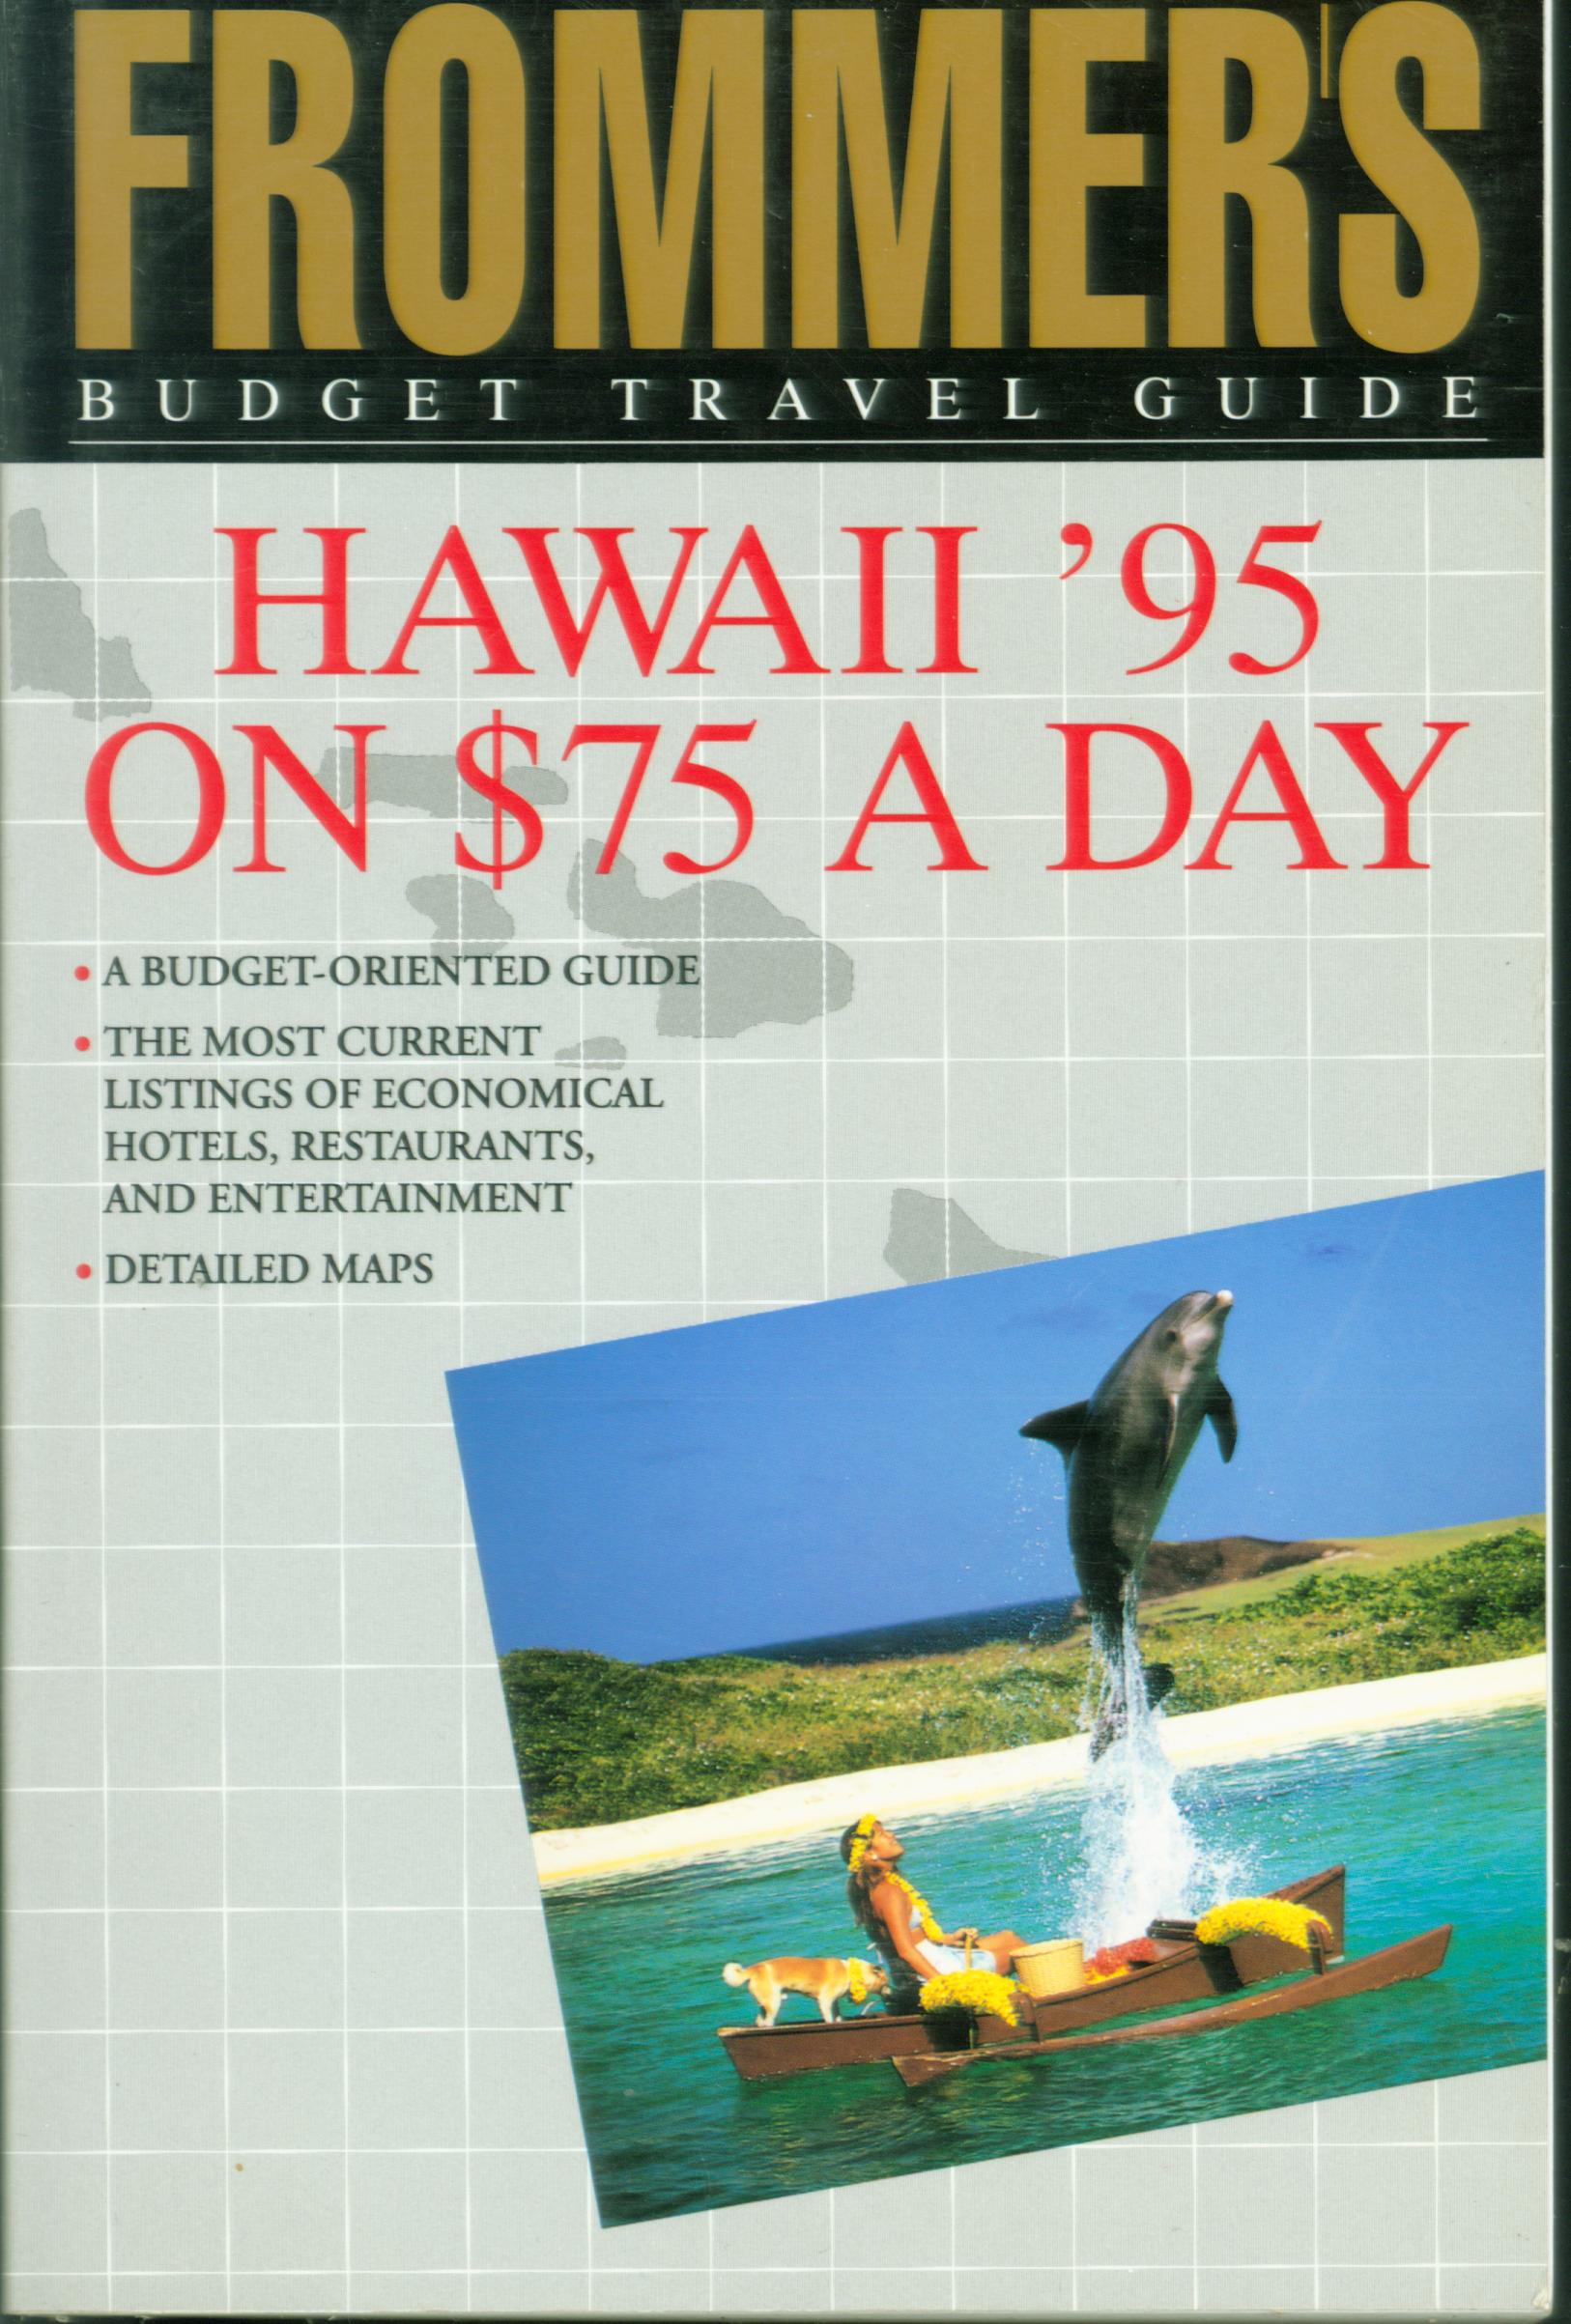 FROMMER'S BUDGET TRAVEL GUIDE: Hawaii on $75 a day. 